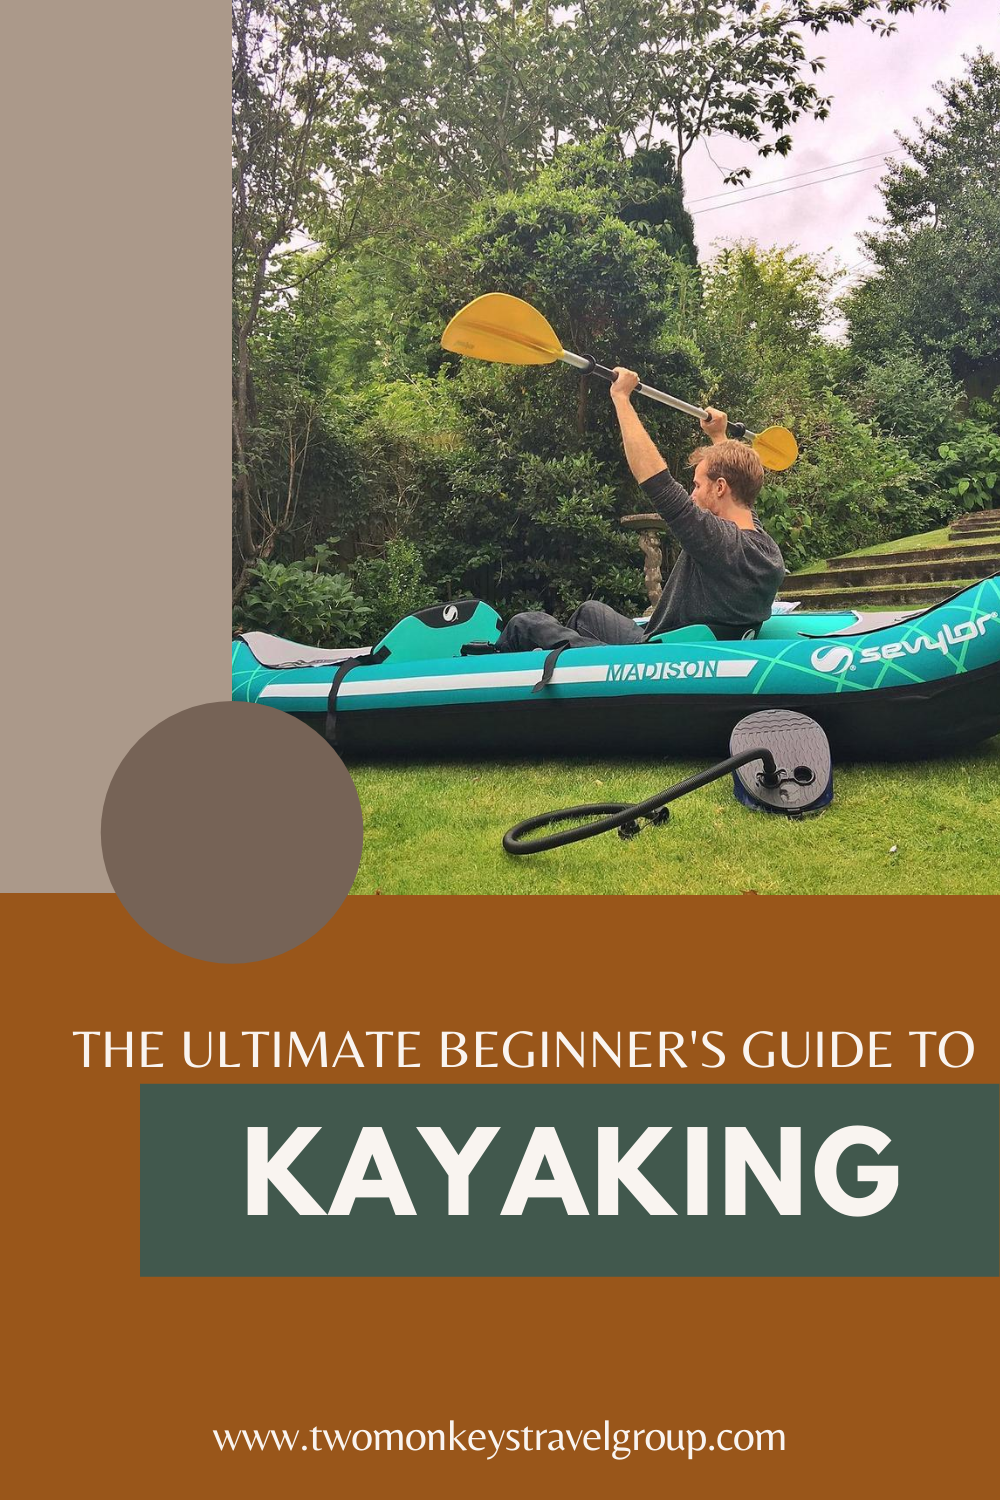 How to Kayak The Ultimate Beginner's Guide to Kayaking